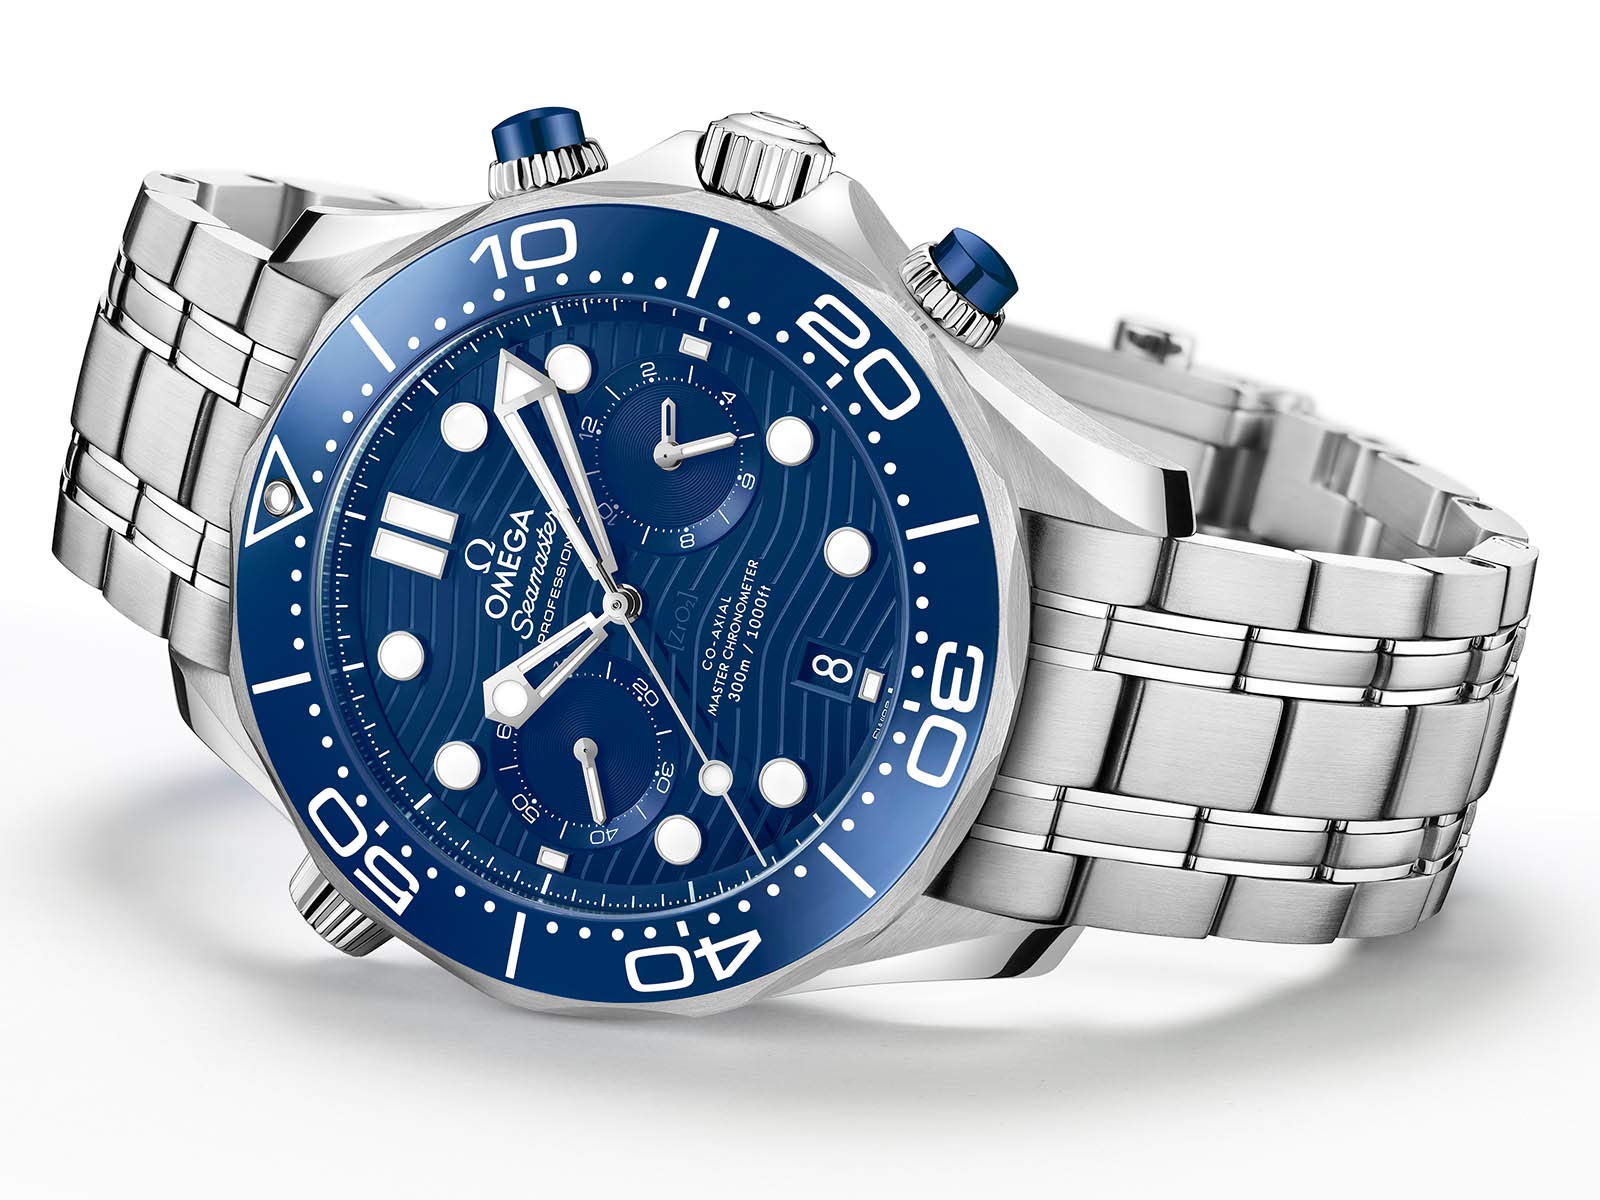 Omega Diver 300M Co‑Axial Master Chronometer Chronograph 44mm Watch 210.30.44.51.03.001